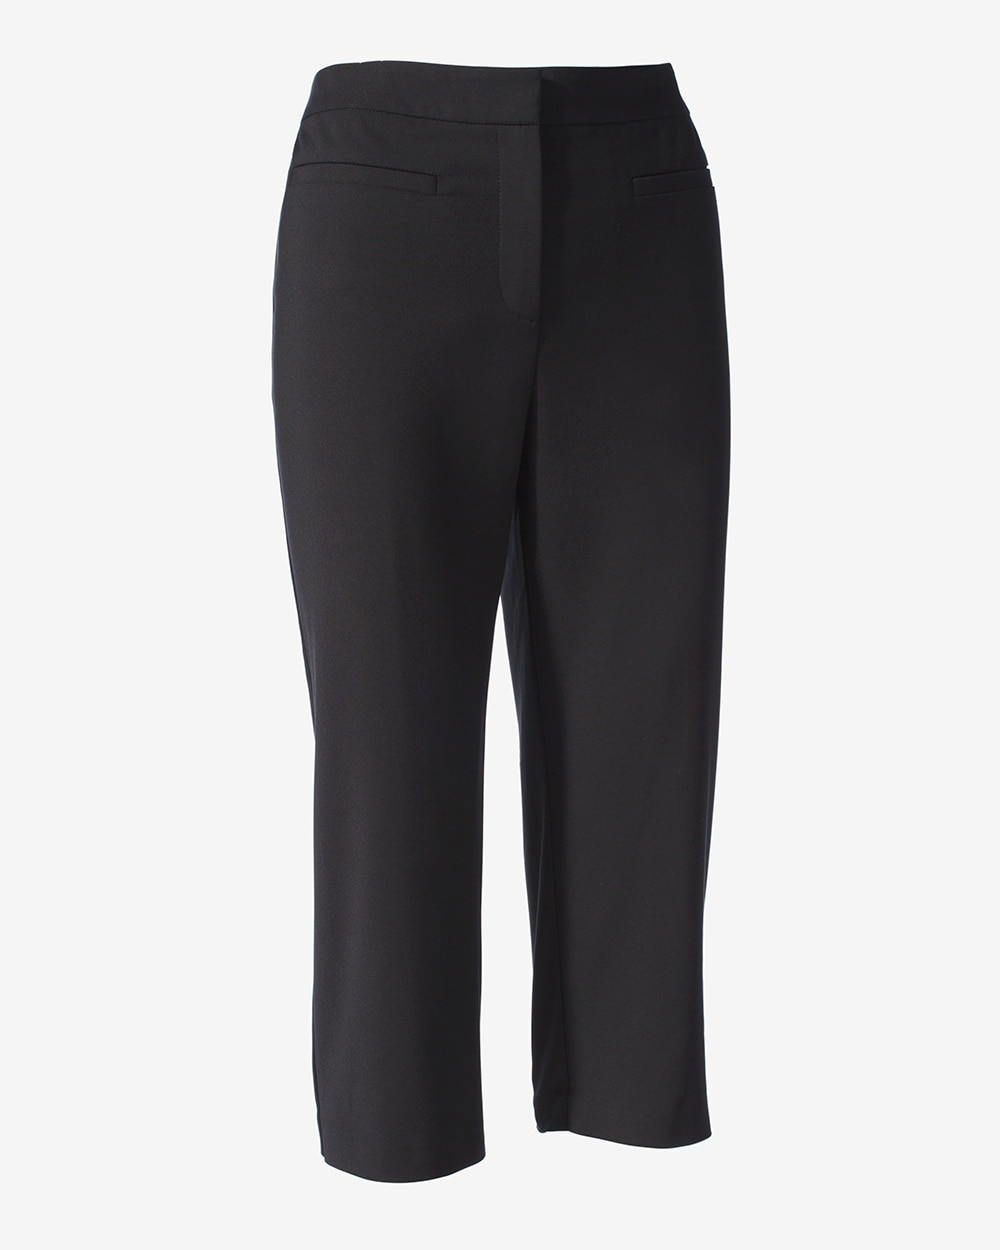 Fabulously Slimming Darcy Crop Pants